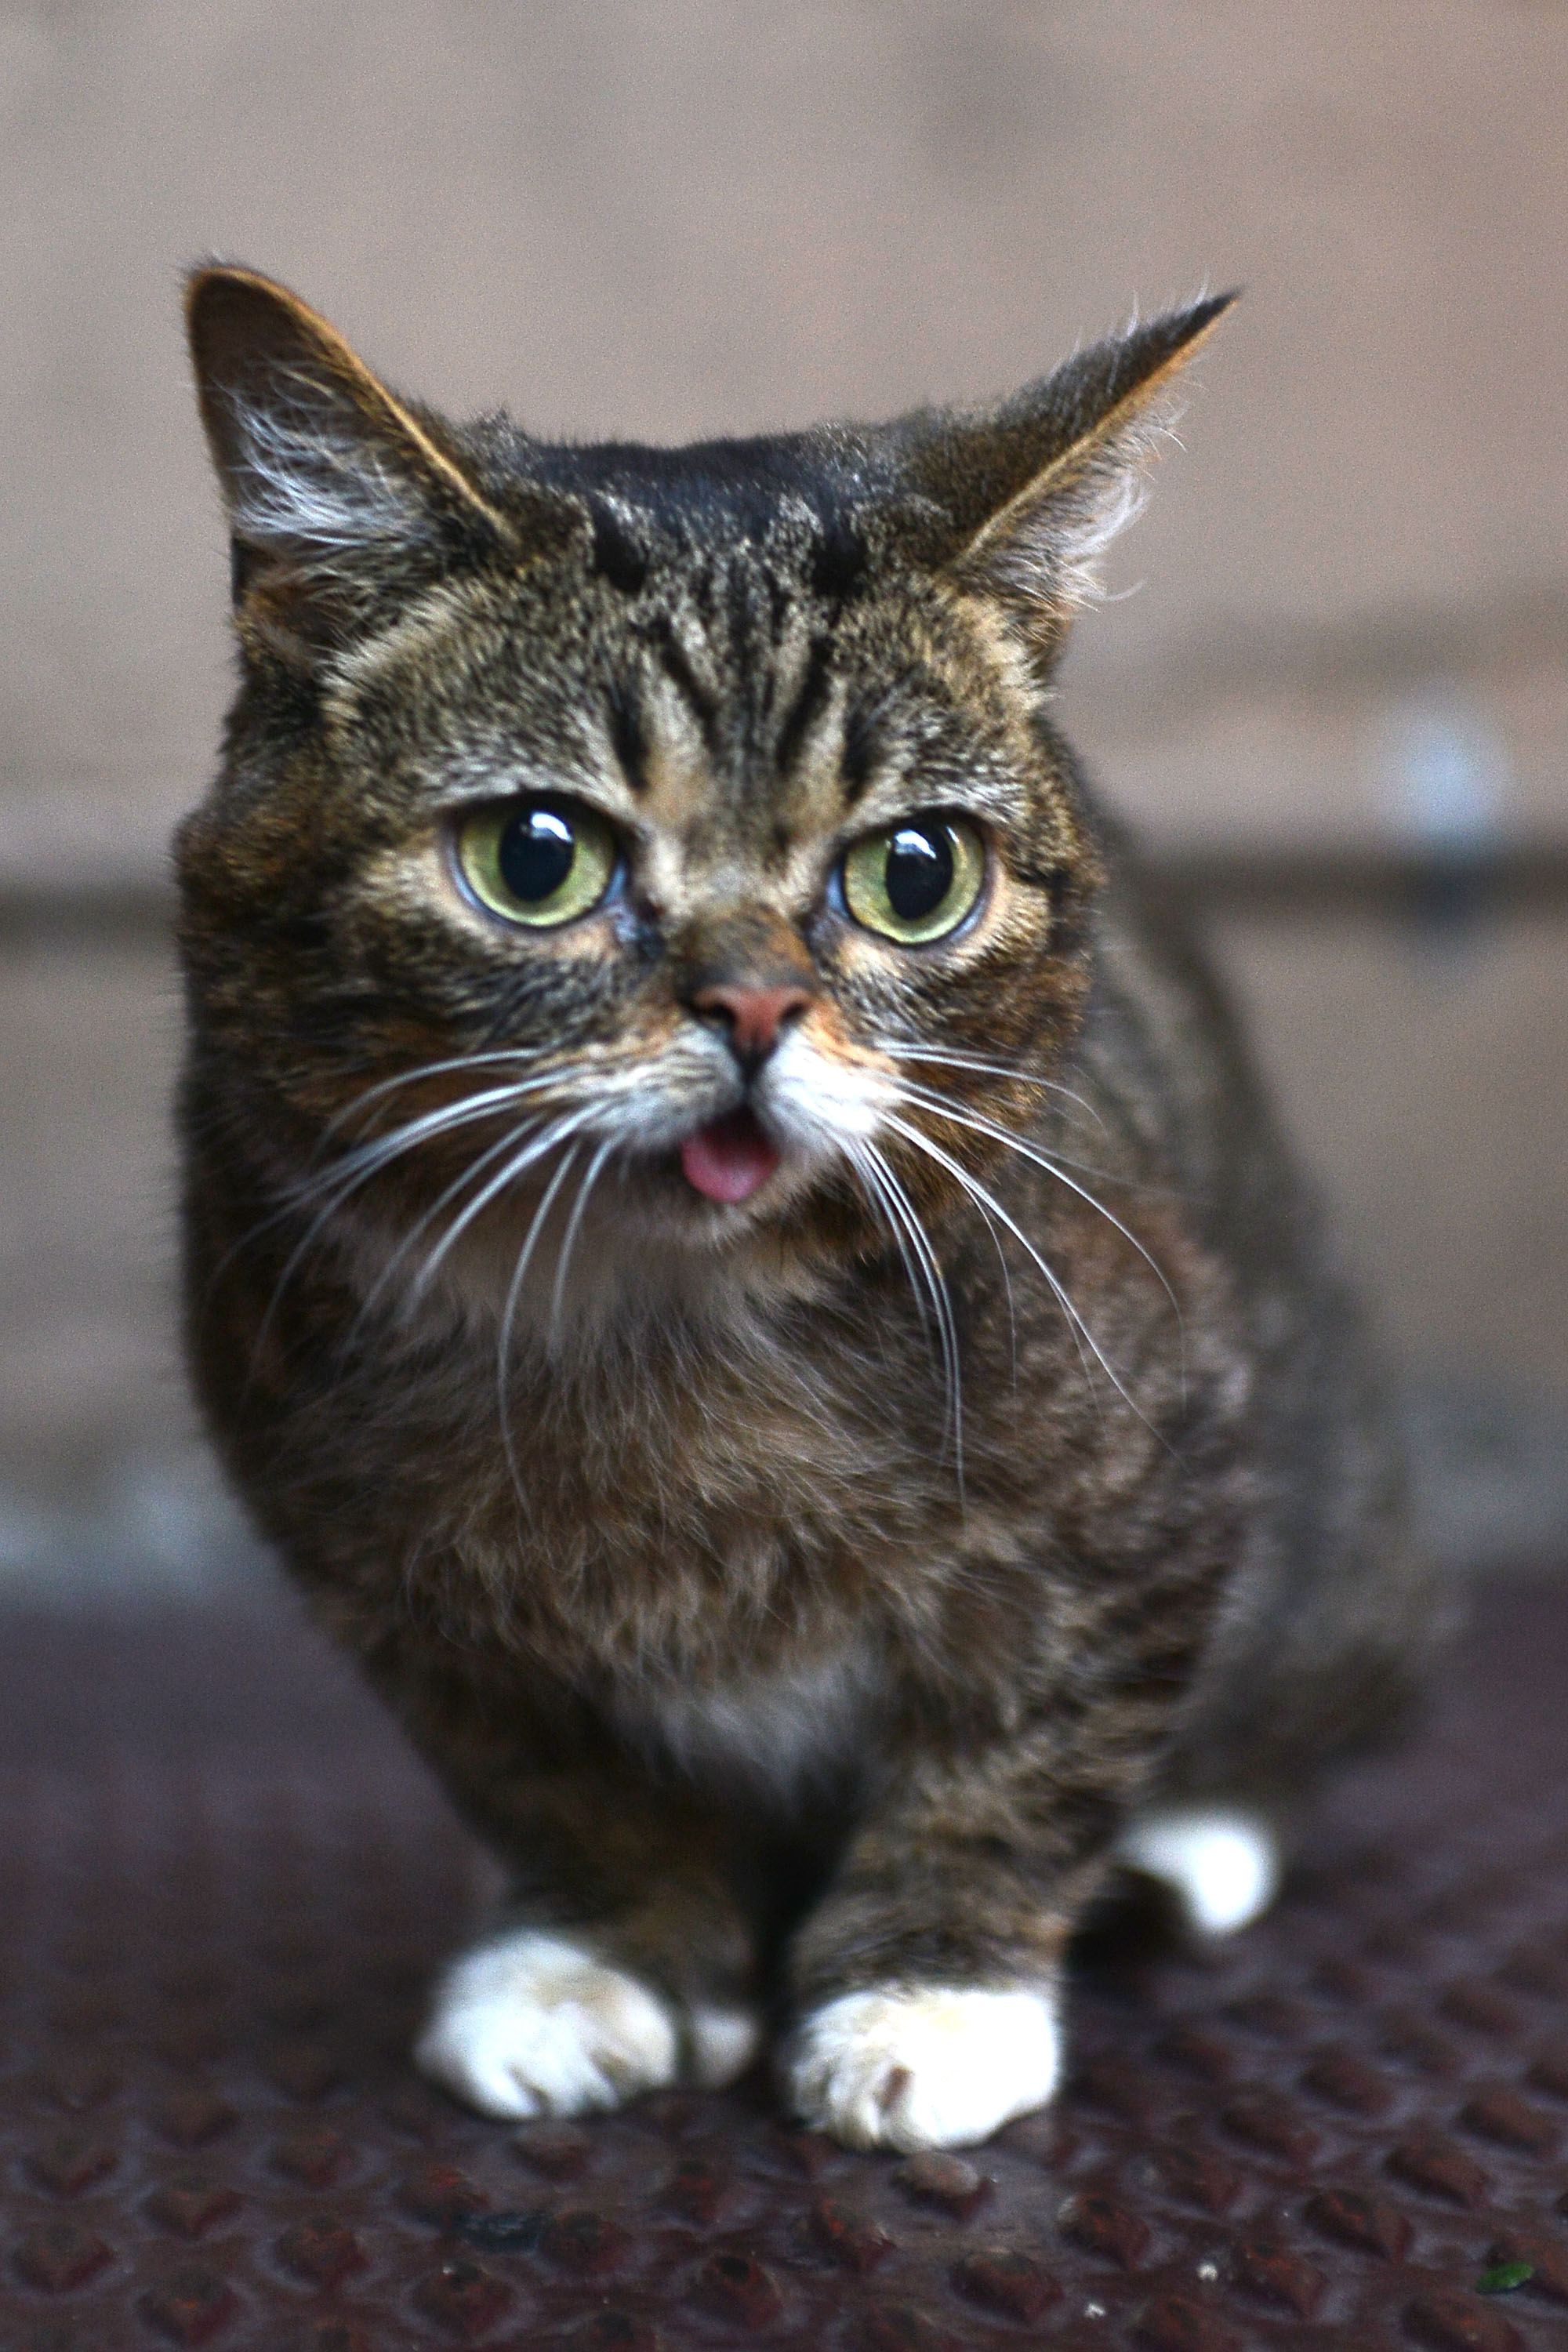 Lil Bub at the A CATbaret! - A One Night Only Celebrity Musical Celebration of the Alluring Feline in Los Angeles on Aug. 9, 2014.